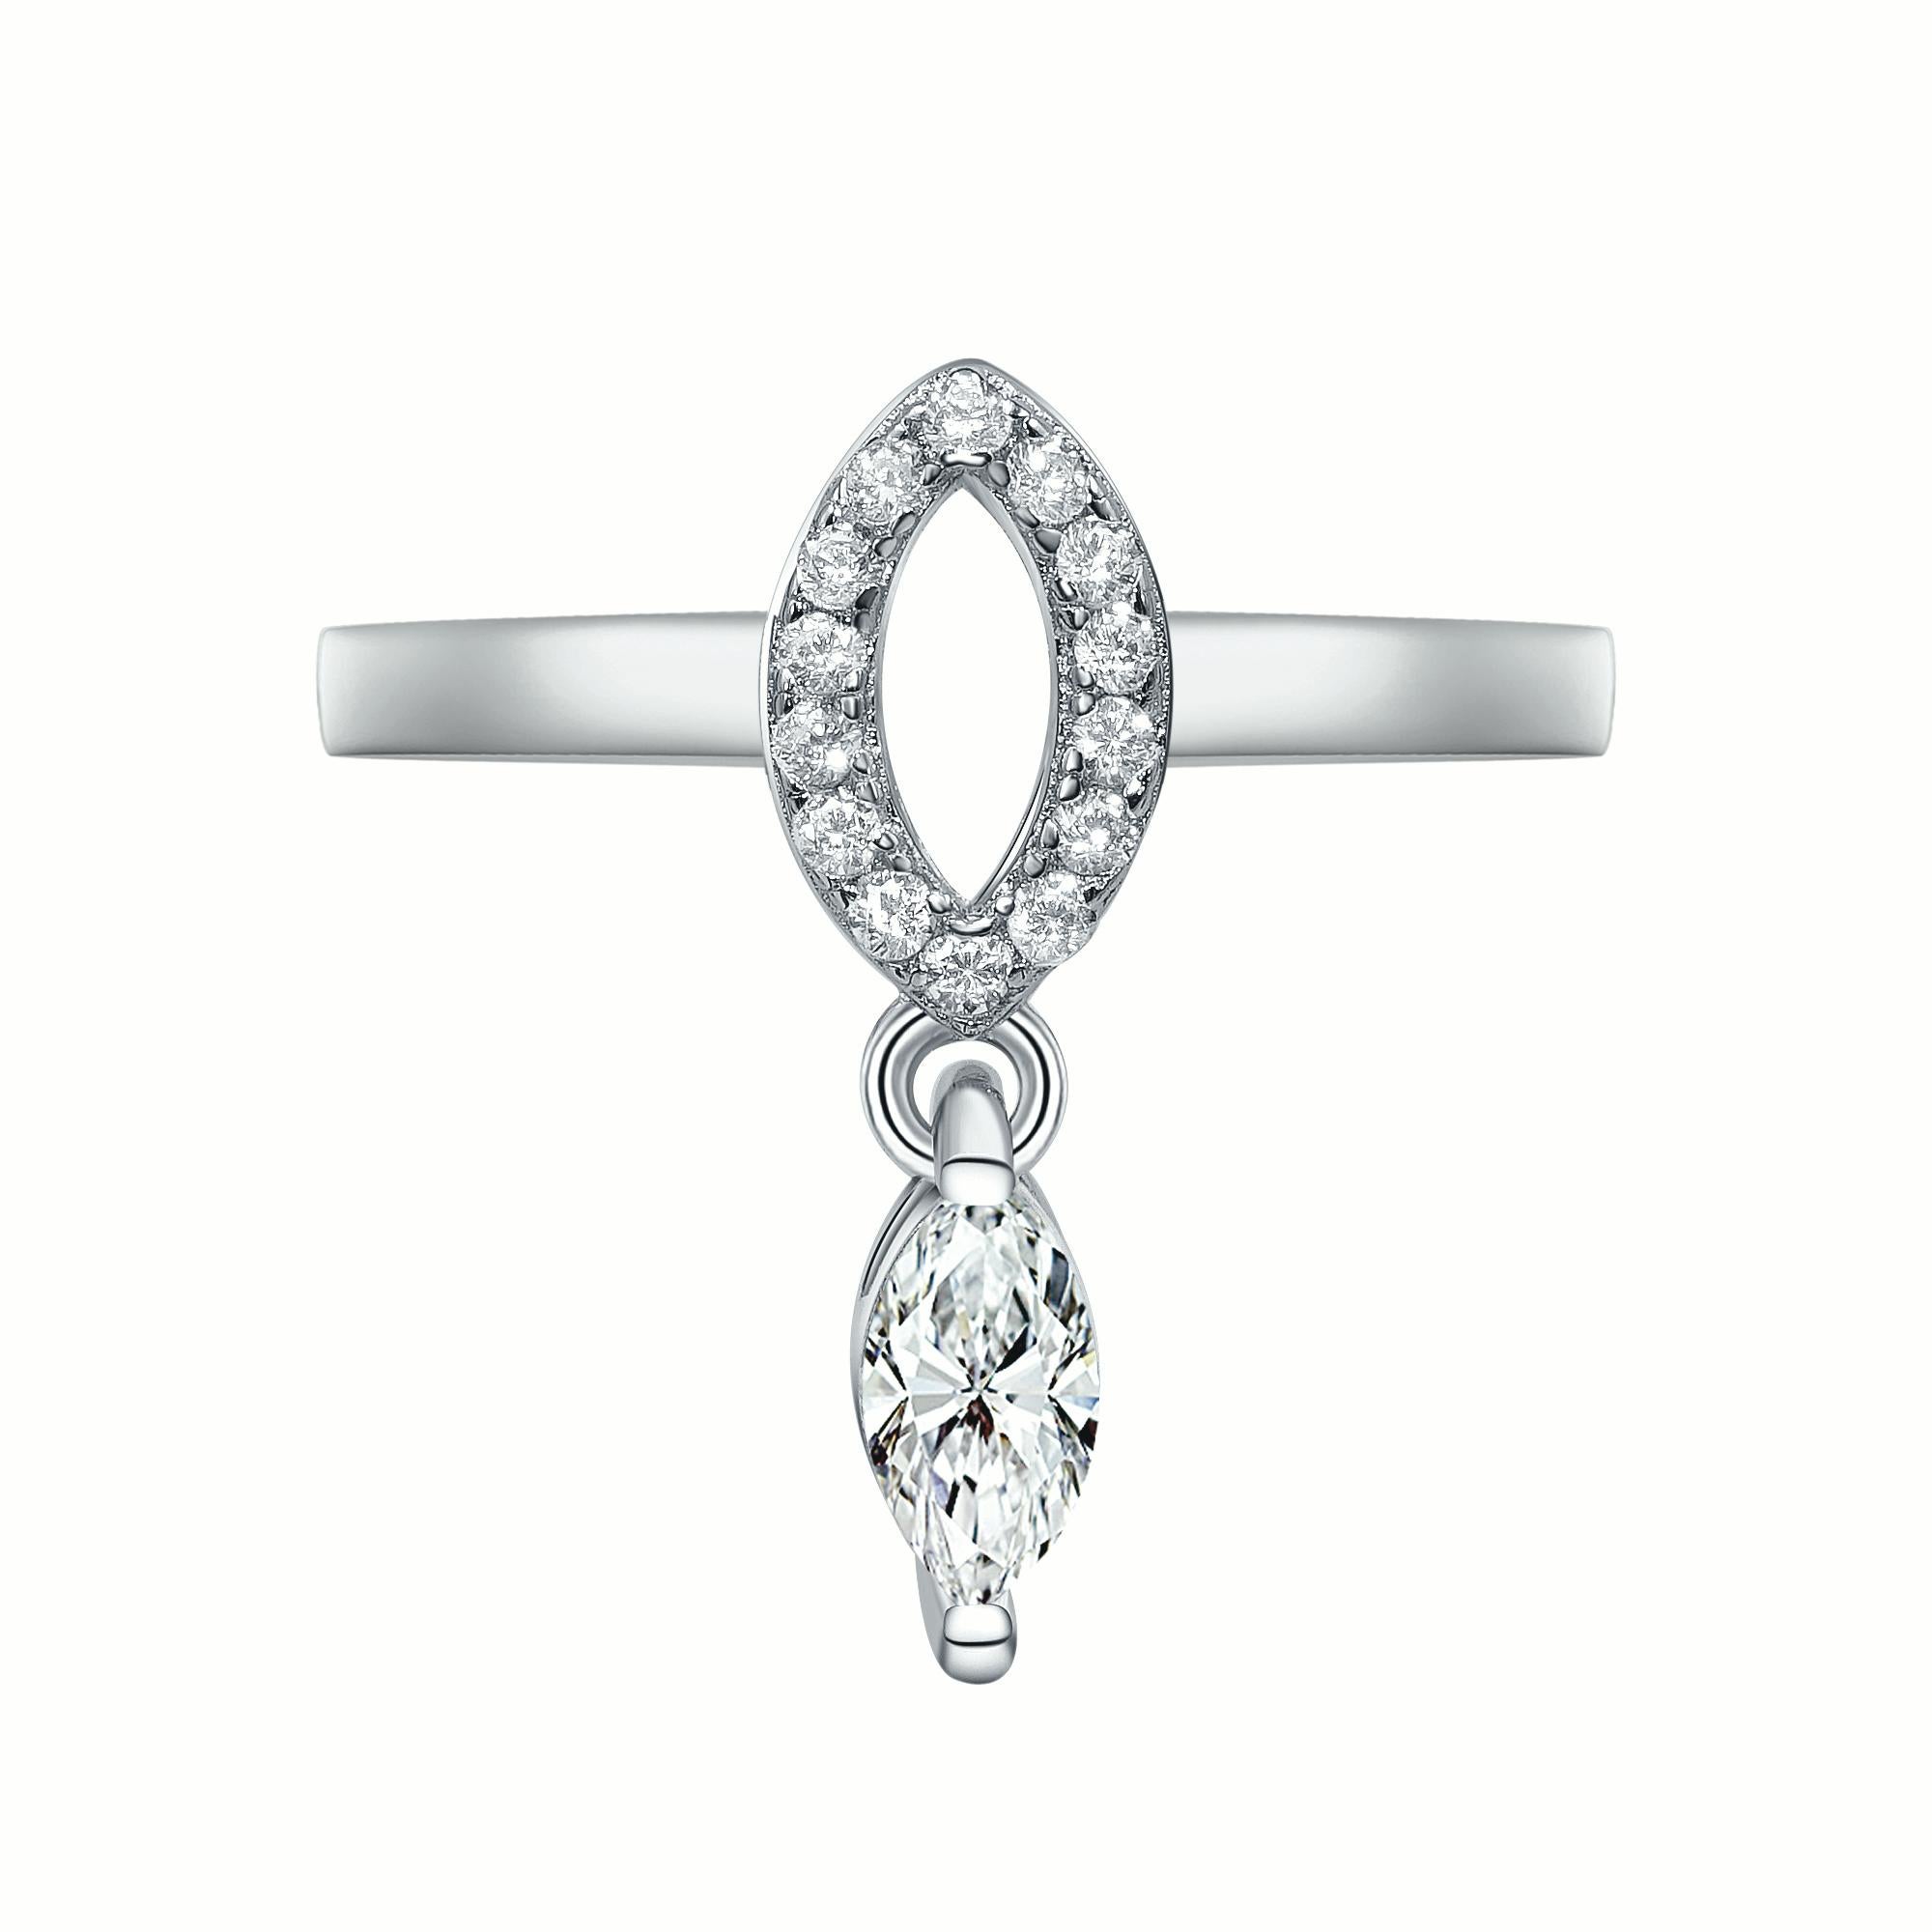 Total carat weight approx. 0.284ct Diamonds in G-H colour, VS clarity

The price includes 20% VAT. Customers outside the EU are eligible for VAT exemption. Please contact us for a VAT free price.

Discover our Q garden collection which is inspired